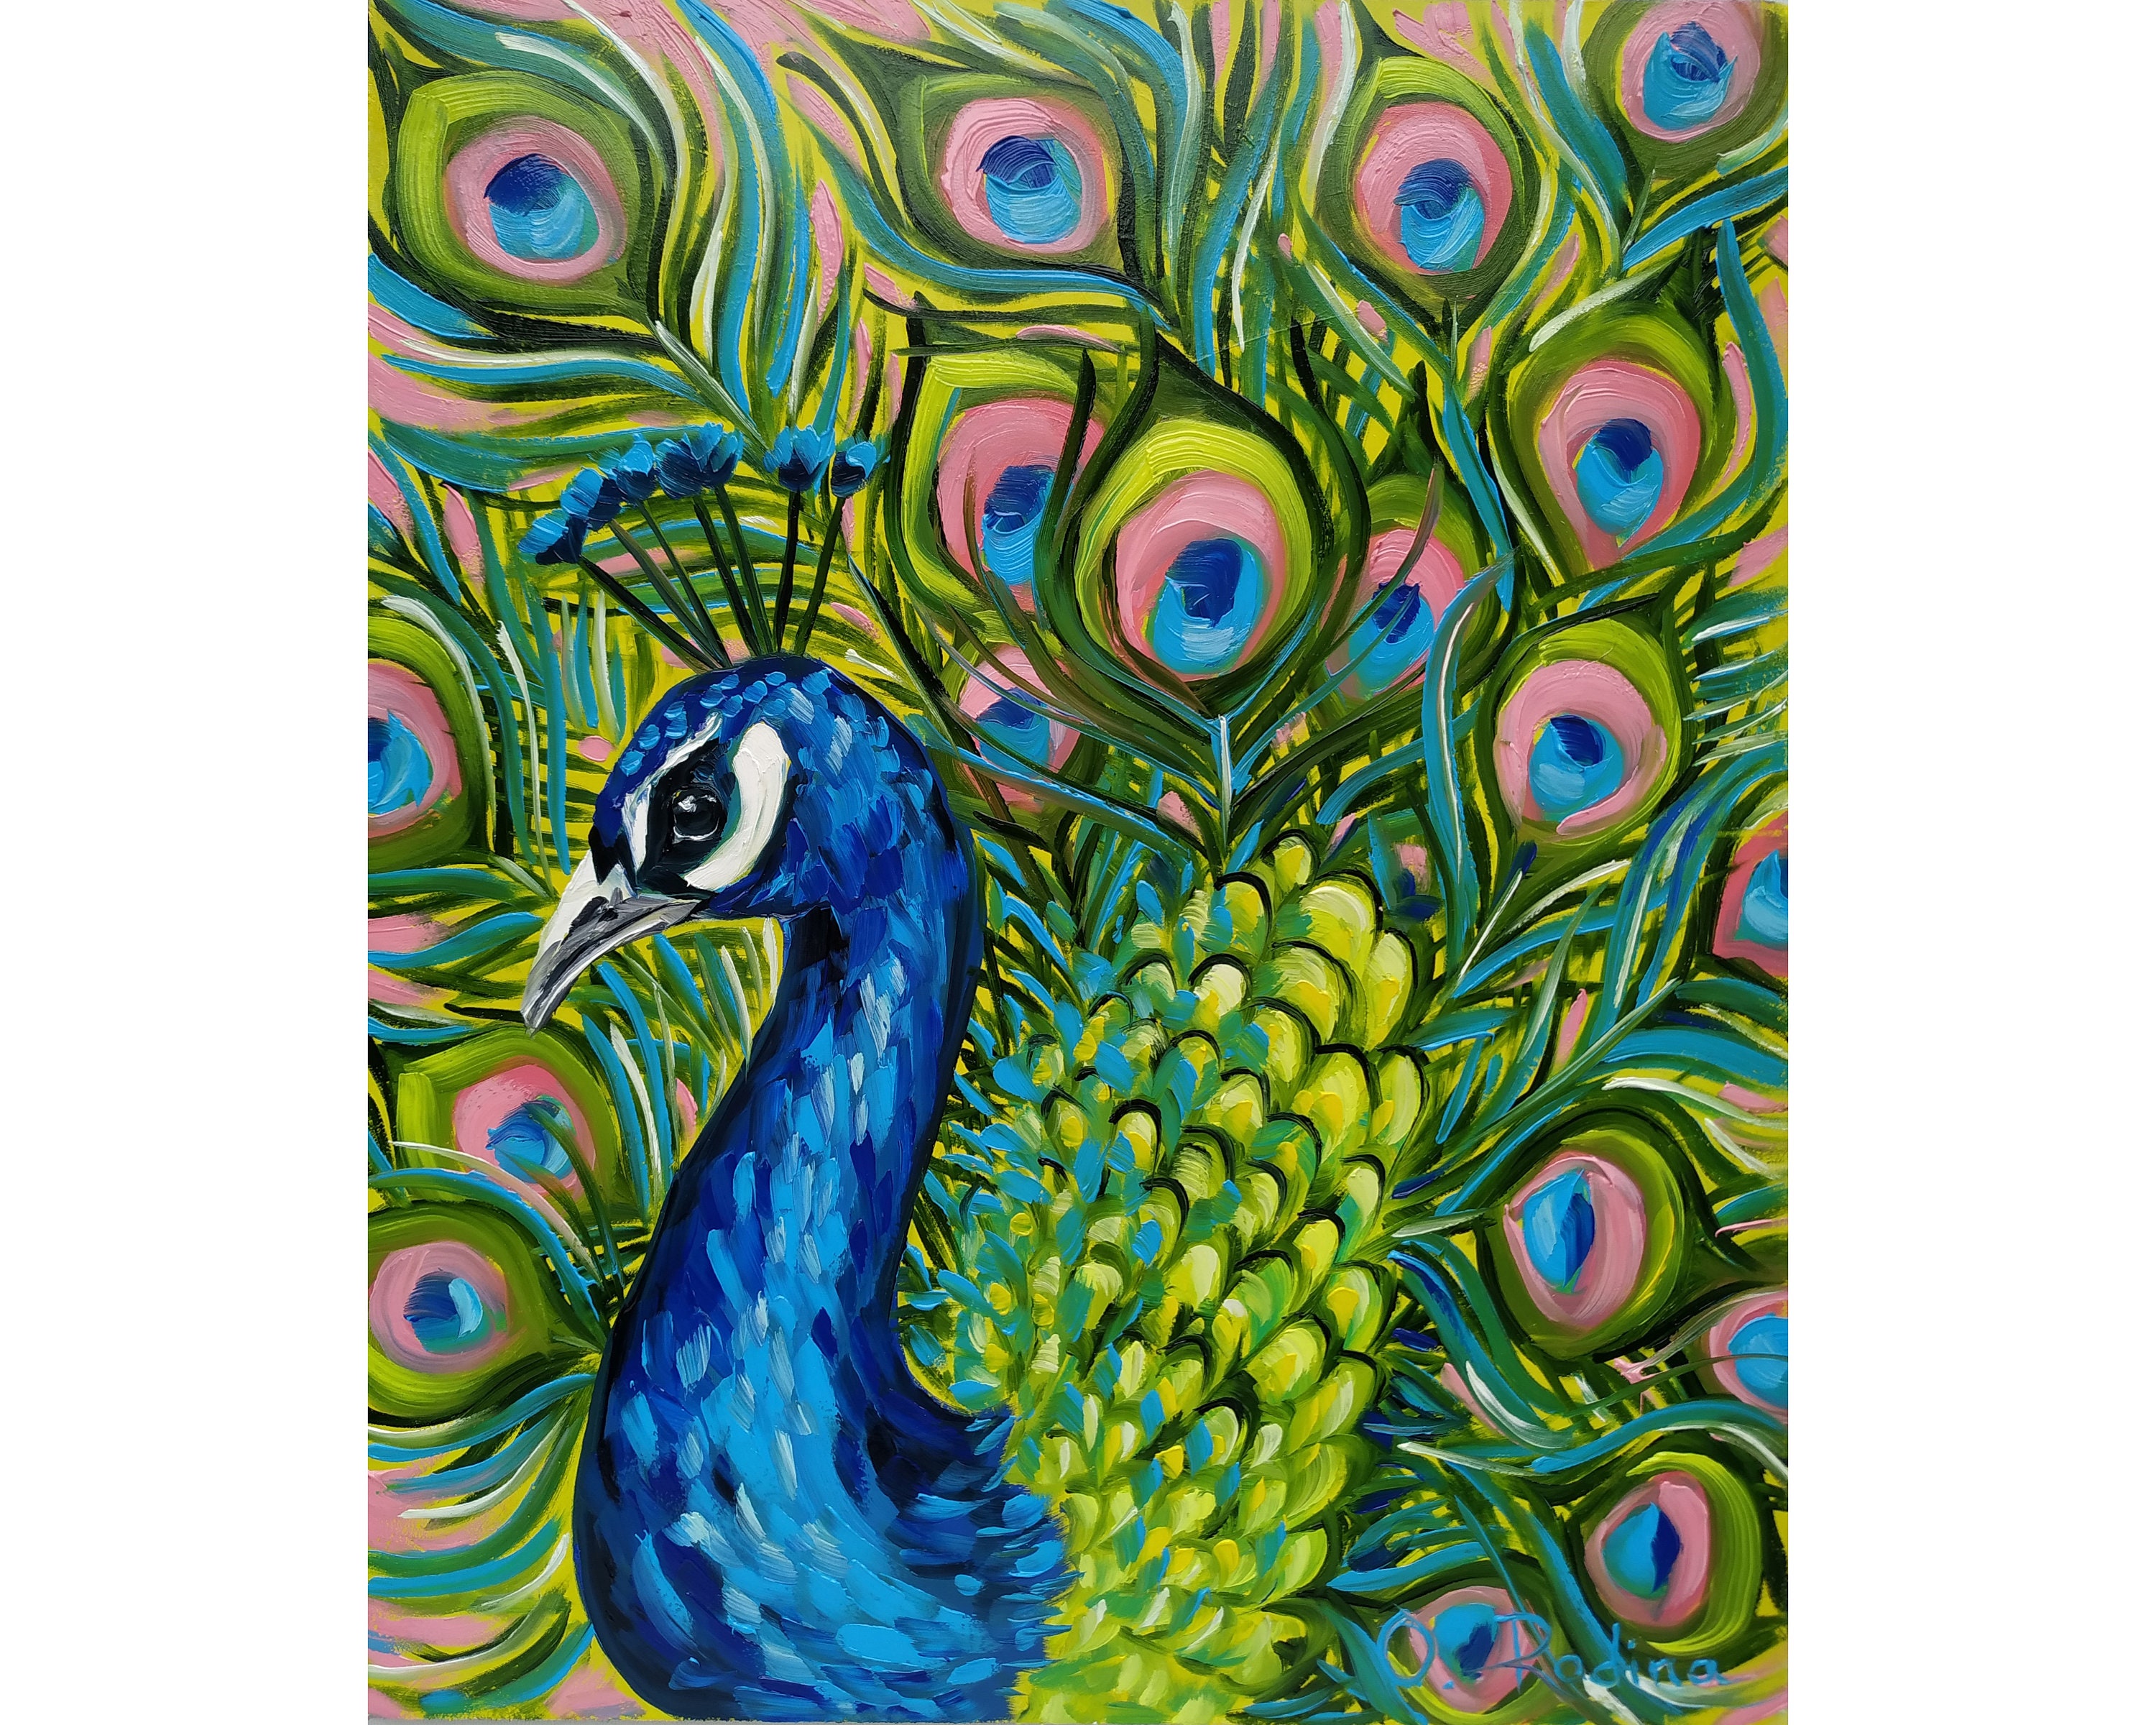 Peacock Original Oil Painting On Canvas Peacock Painting Etsy